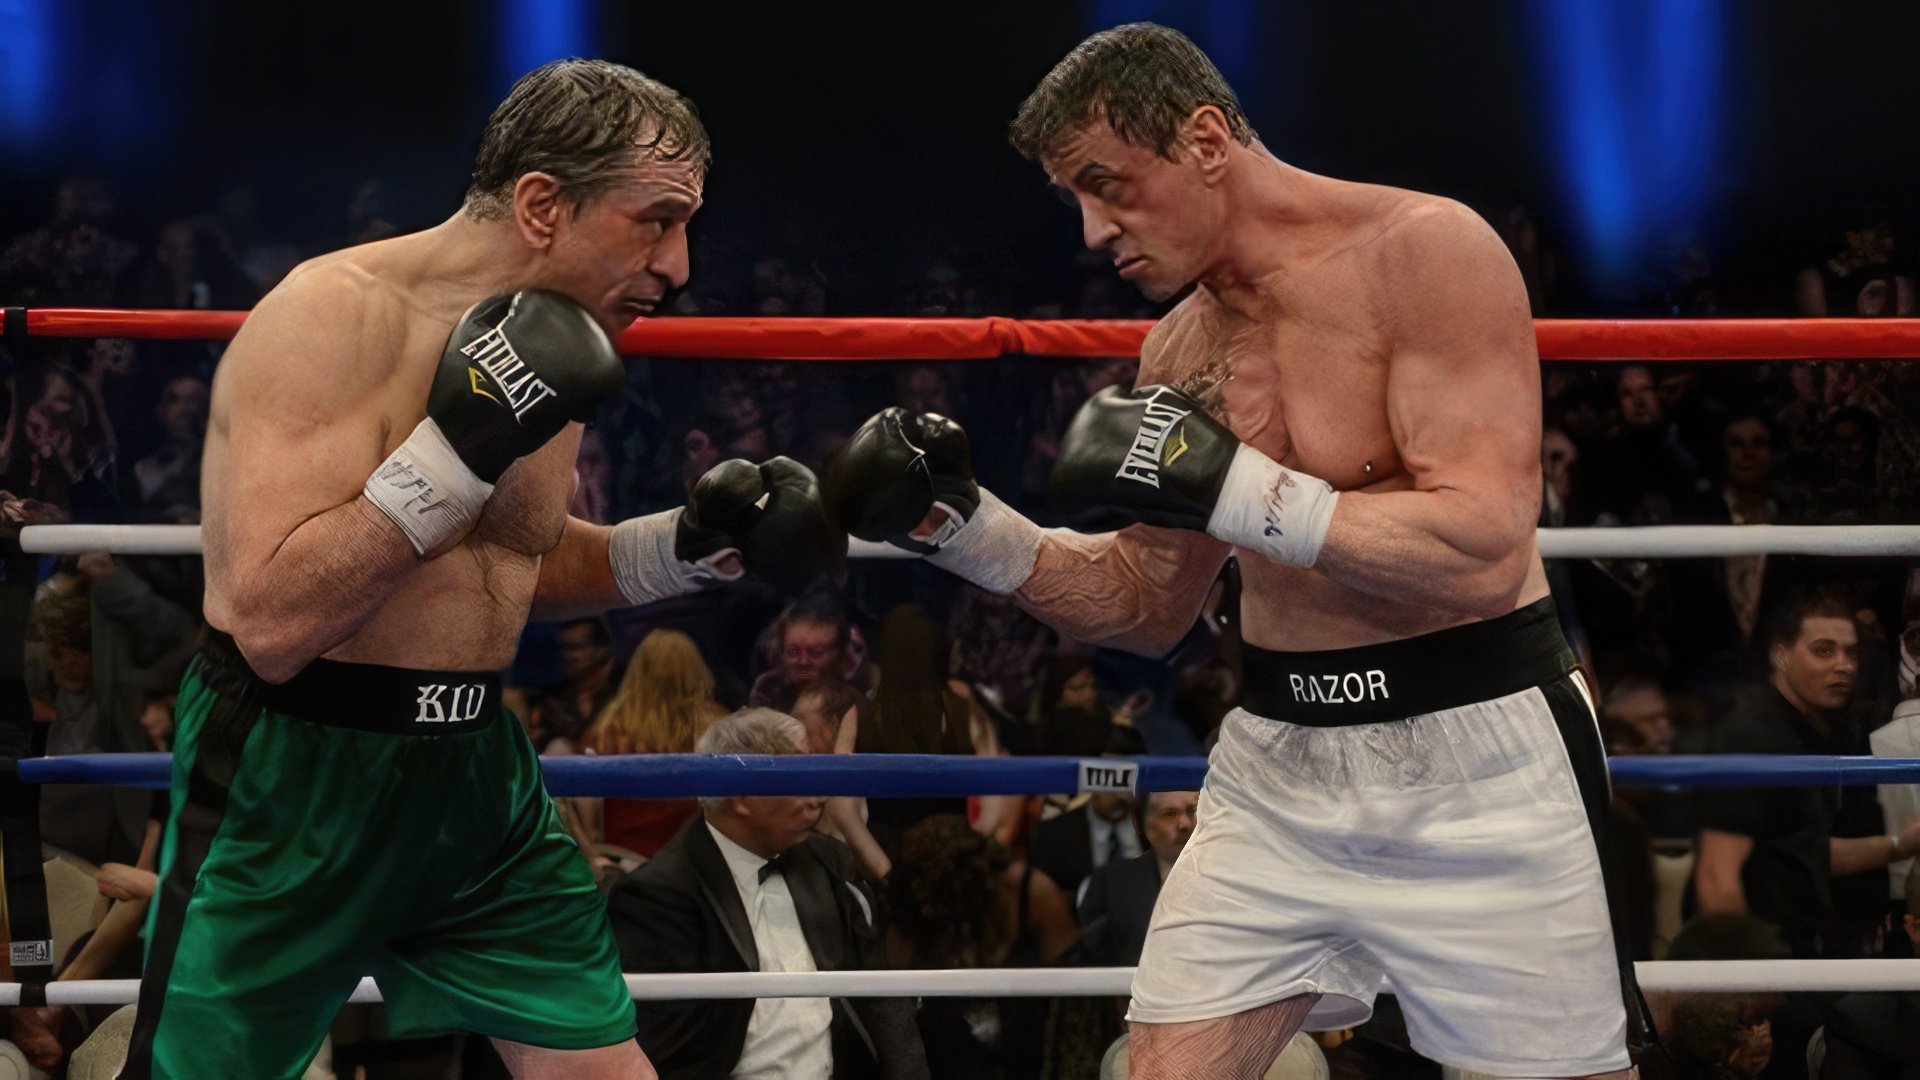 Robert De Niro and Sylvester Stallone in the film 'Grudge Match'